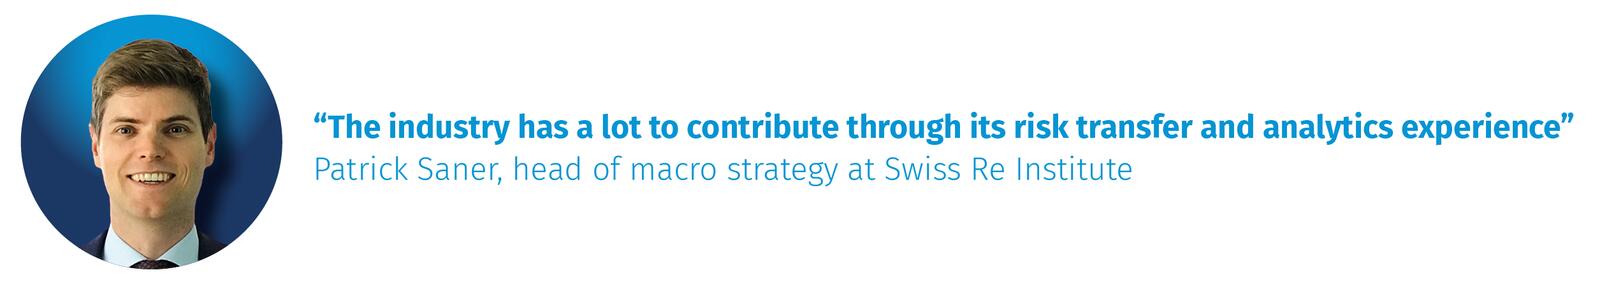 Patrick Saner, head of macro strategy at Swiss Re Institute